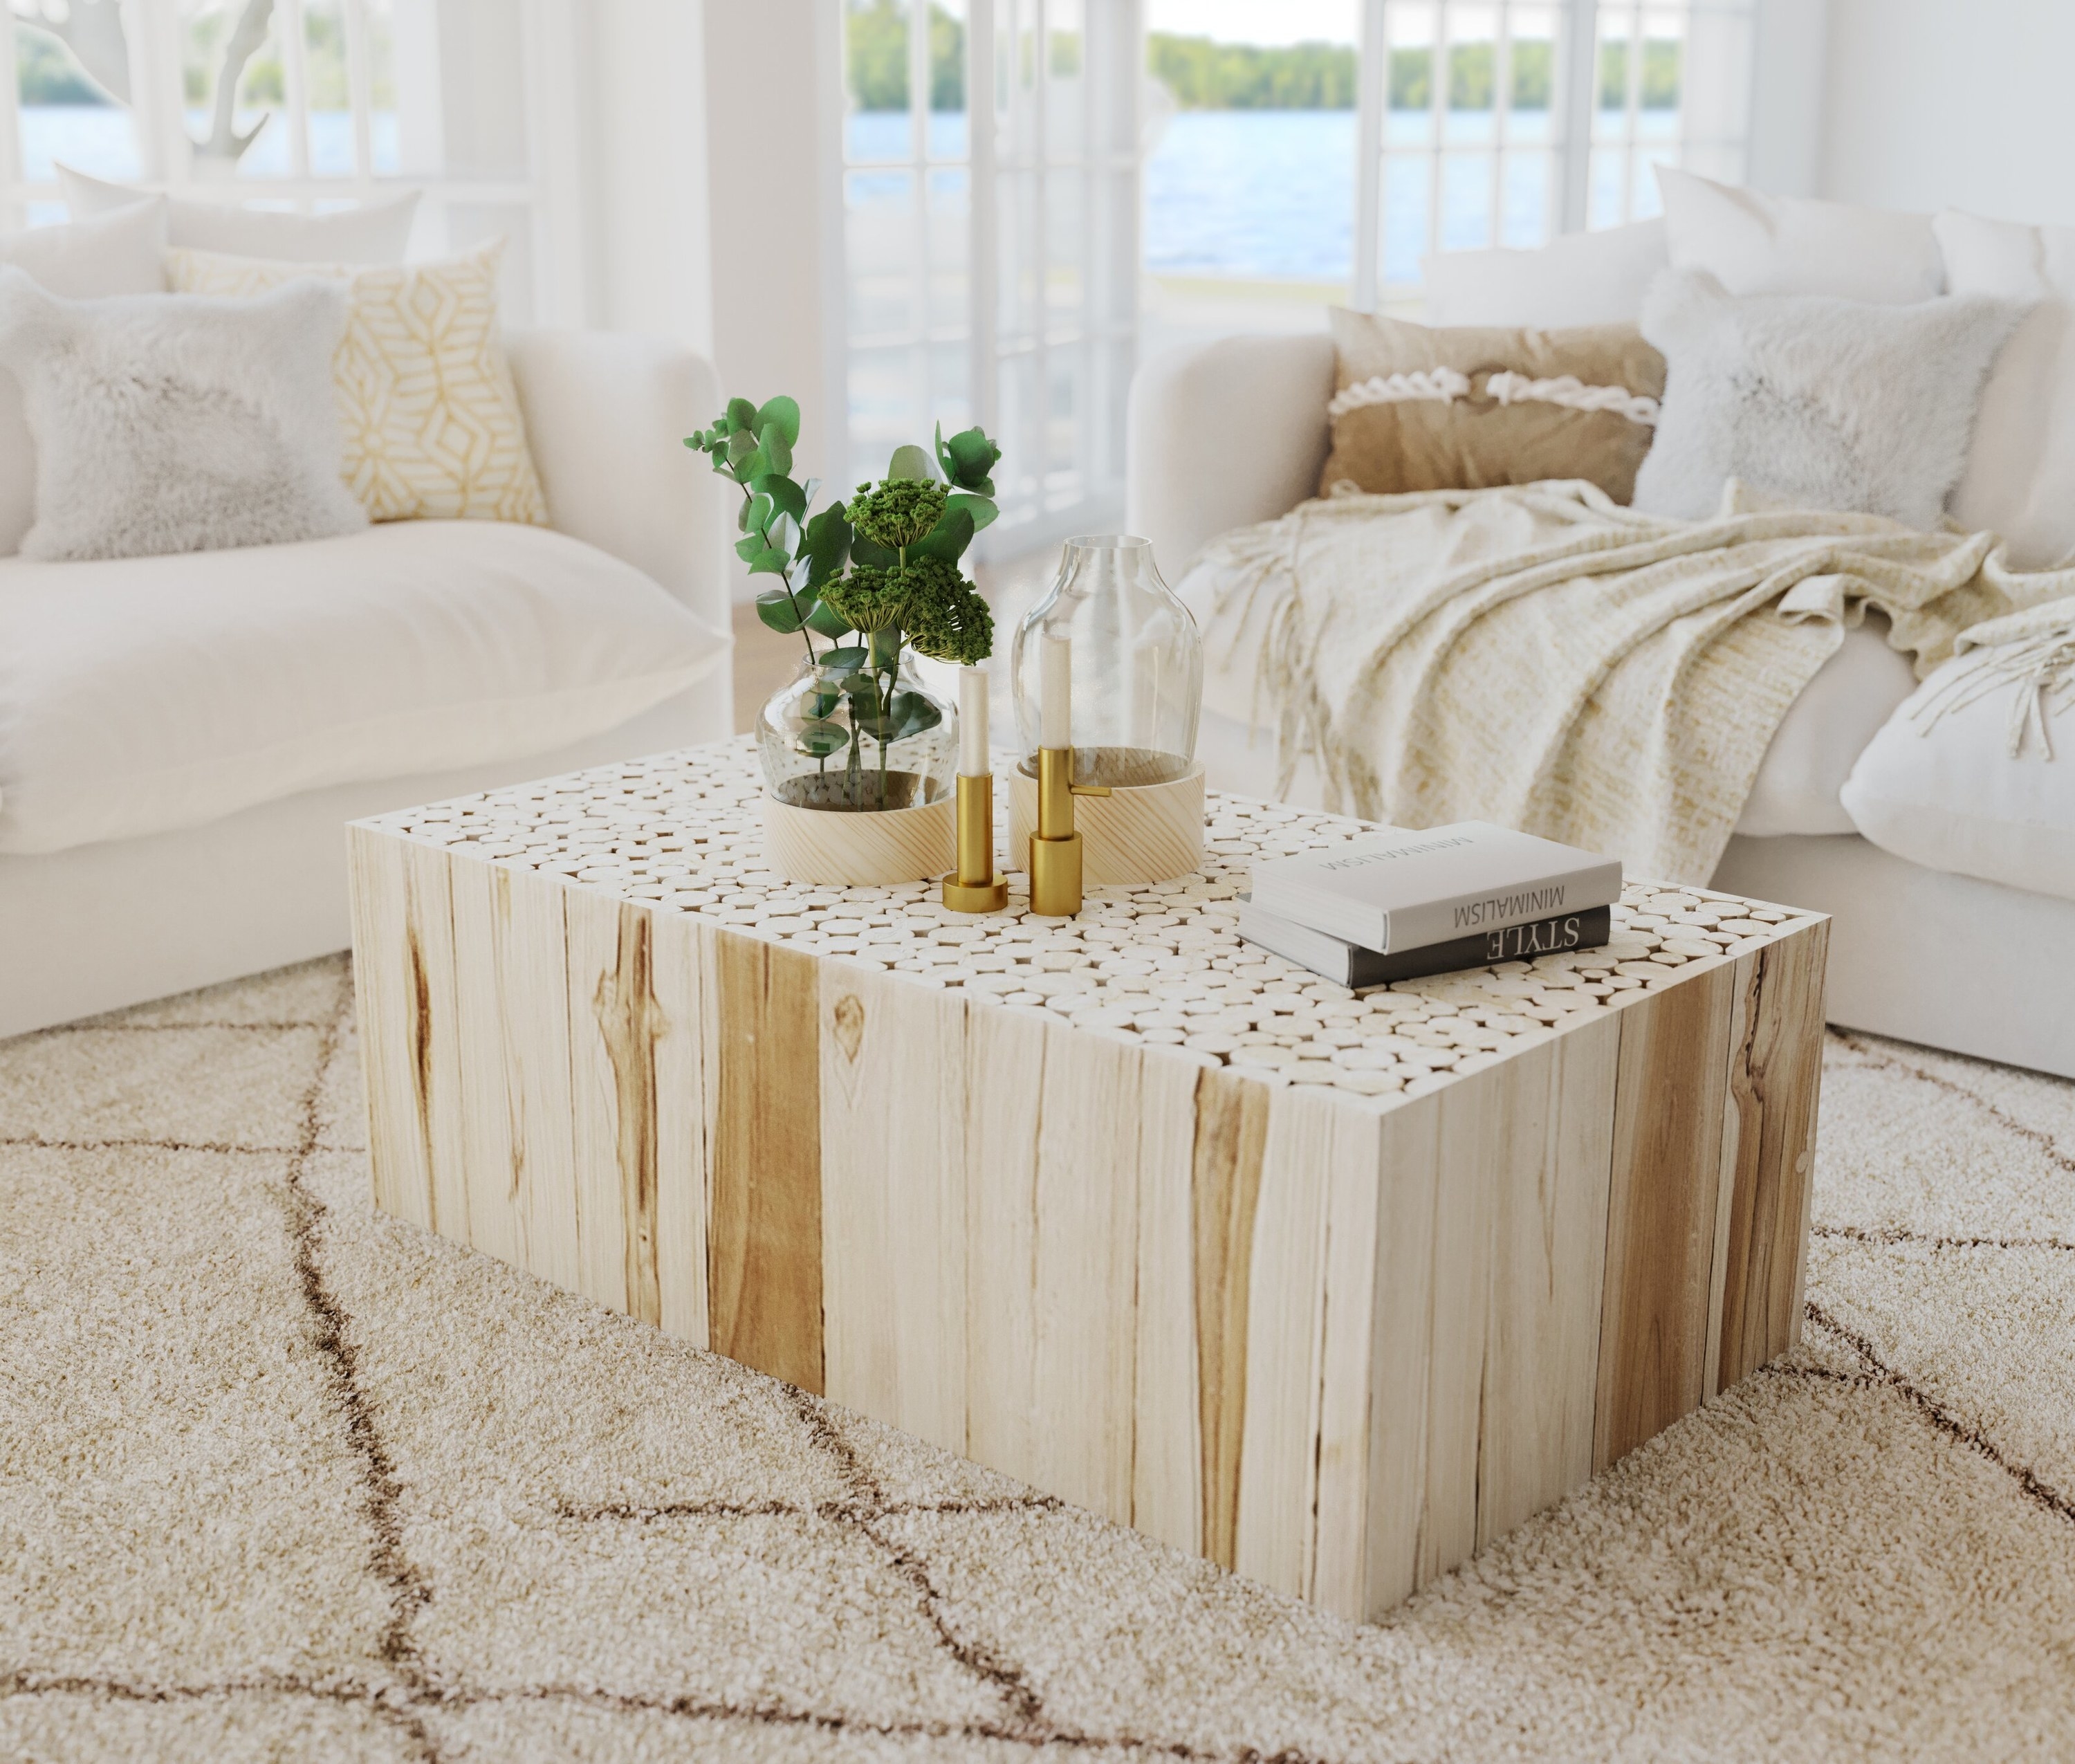 A wooden coffee table in different blonde shades, with a textured top.